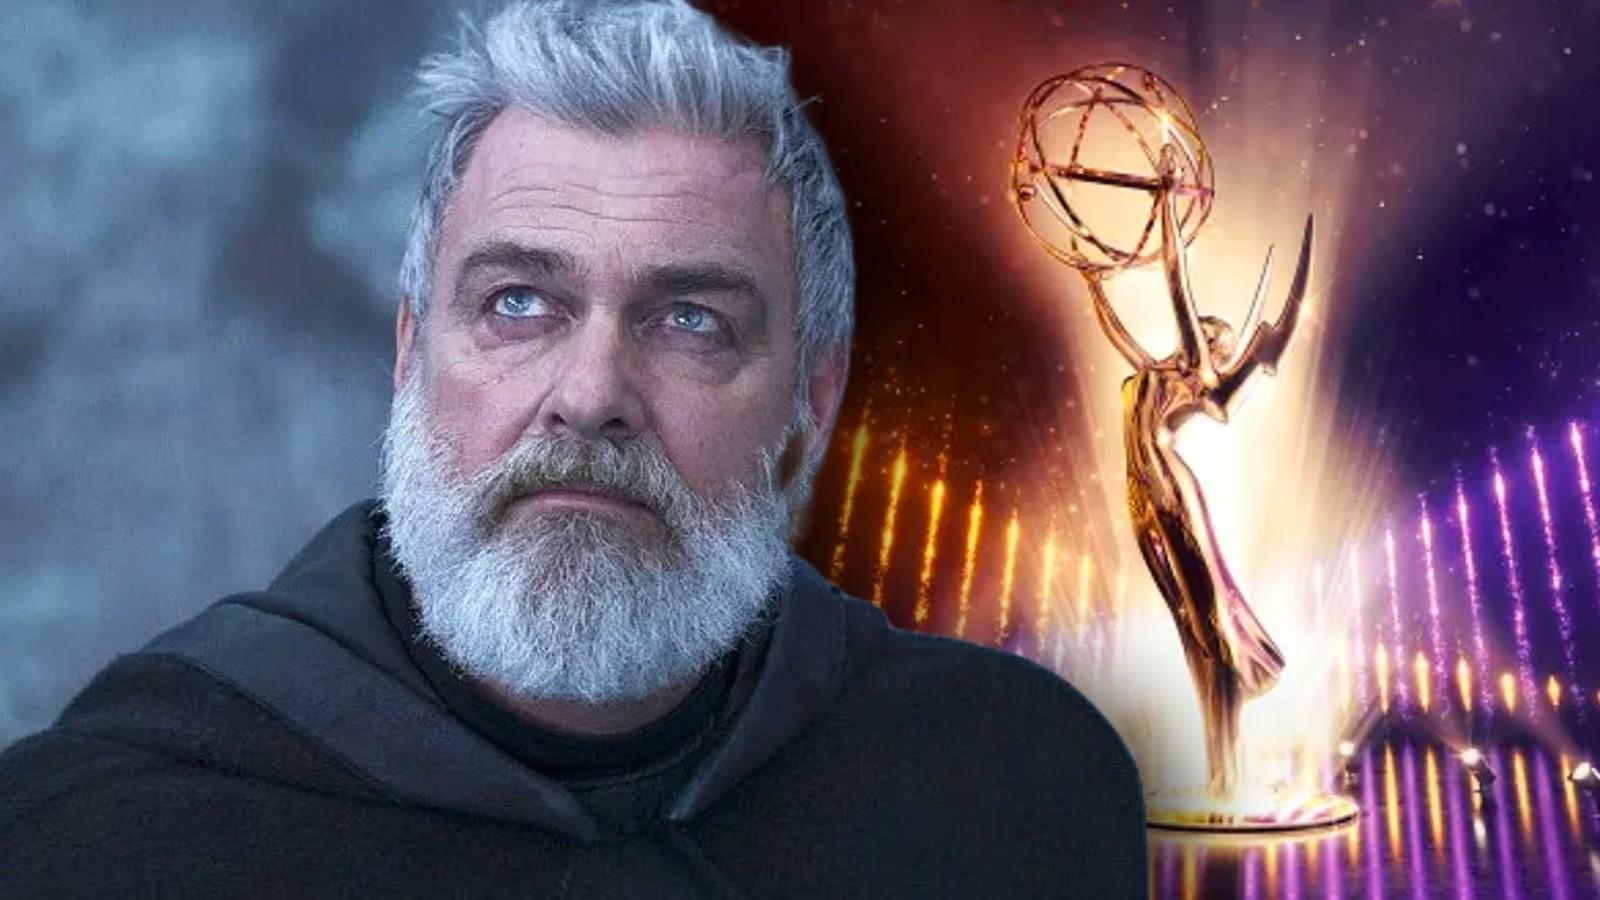 Ray Stevenson in Ahsoka and a still of the Emmys statuette